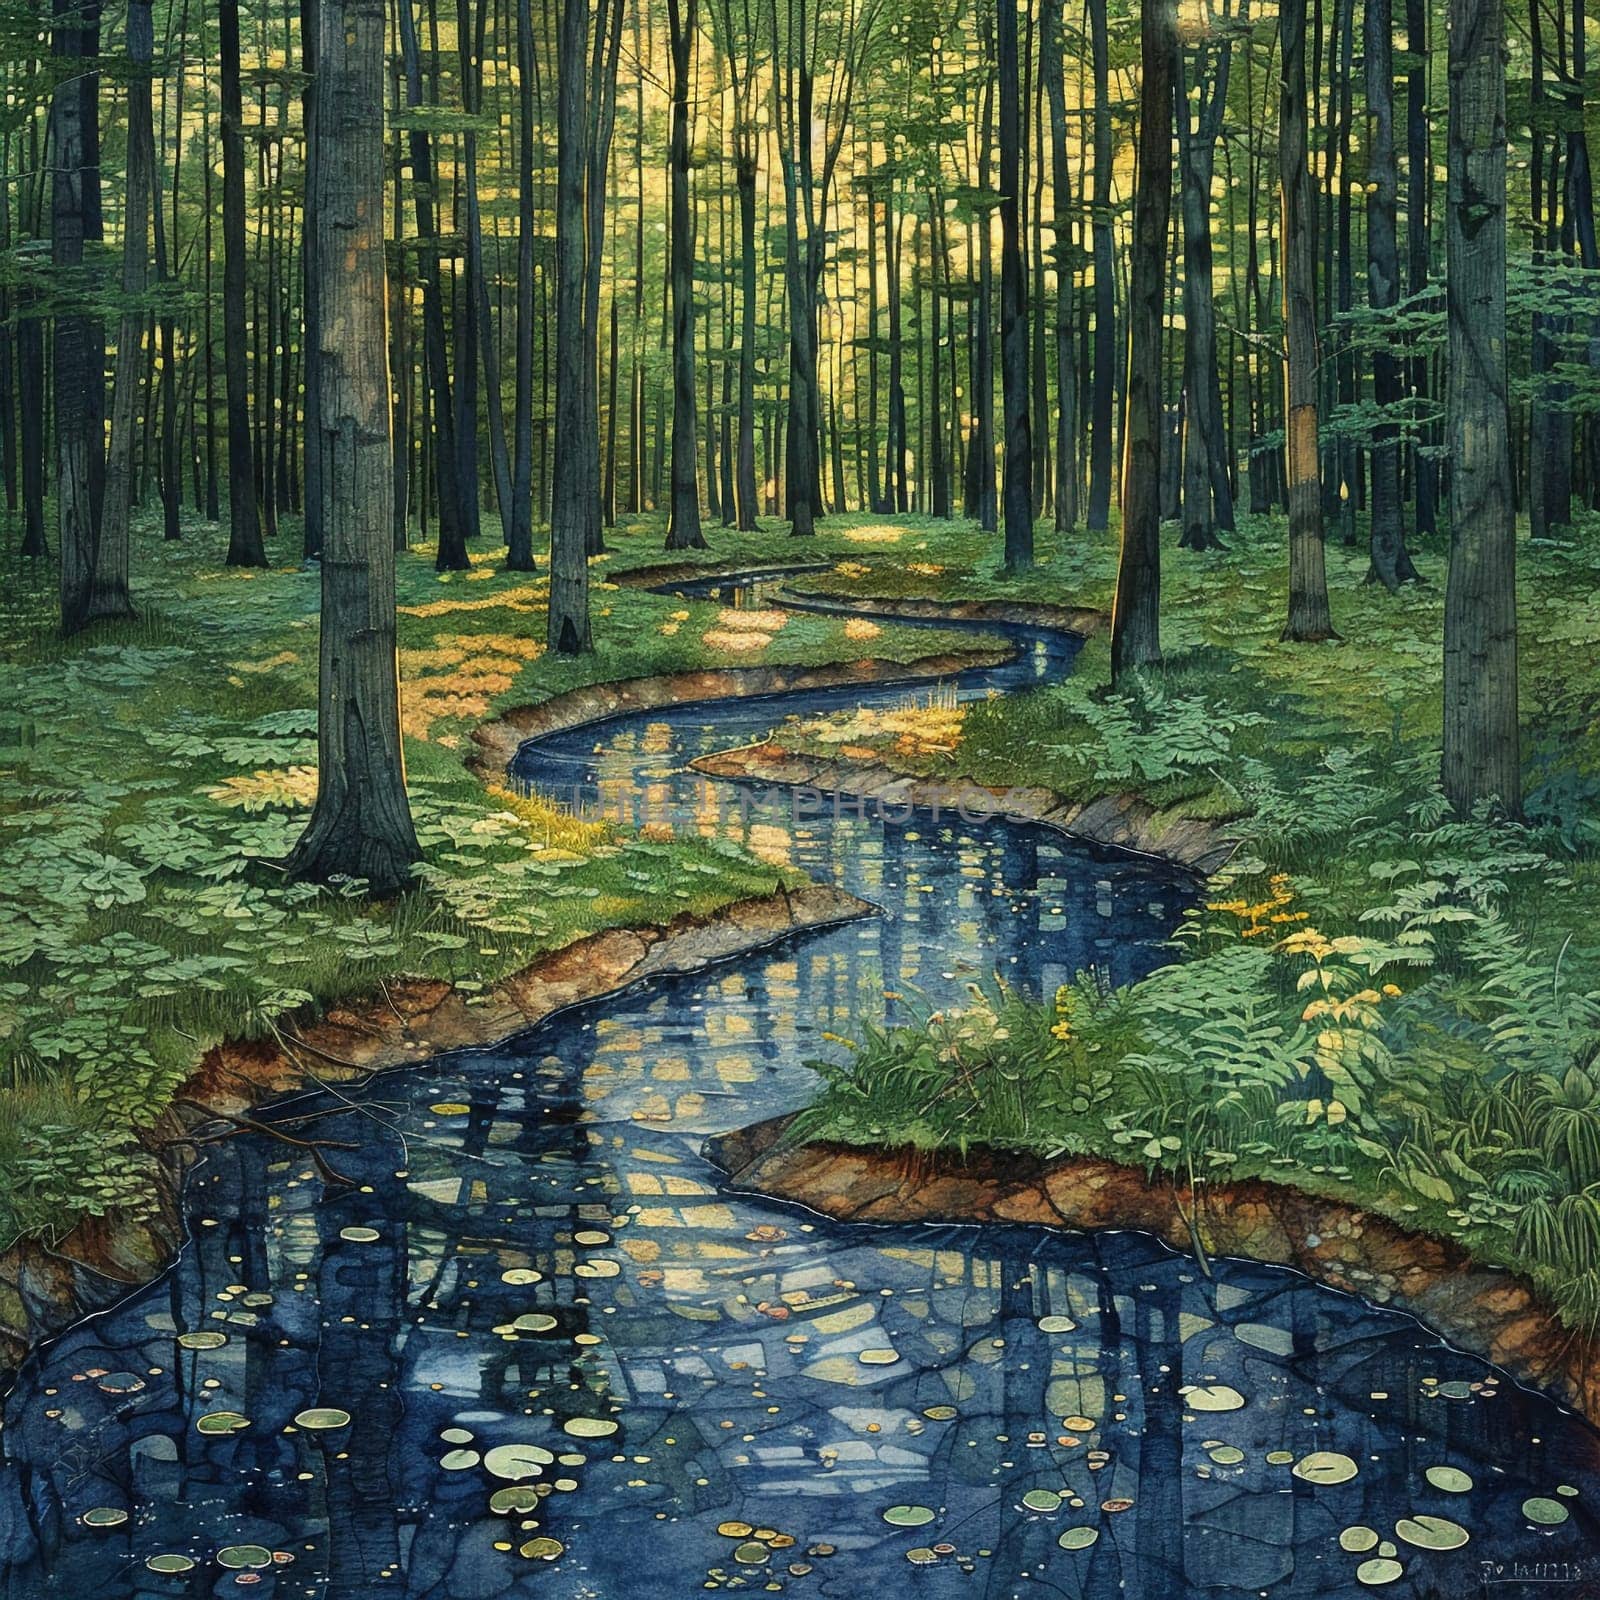 A serene brook winding through a forest, symbolizing peace and the journey of life.